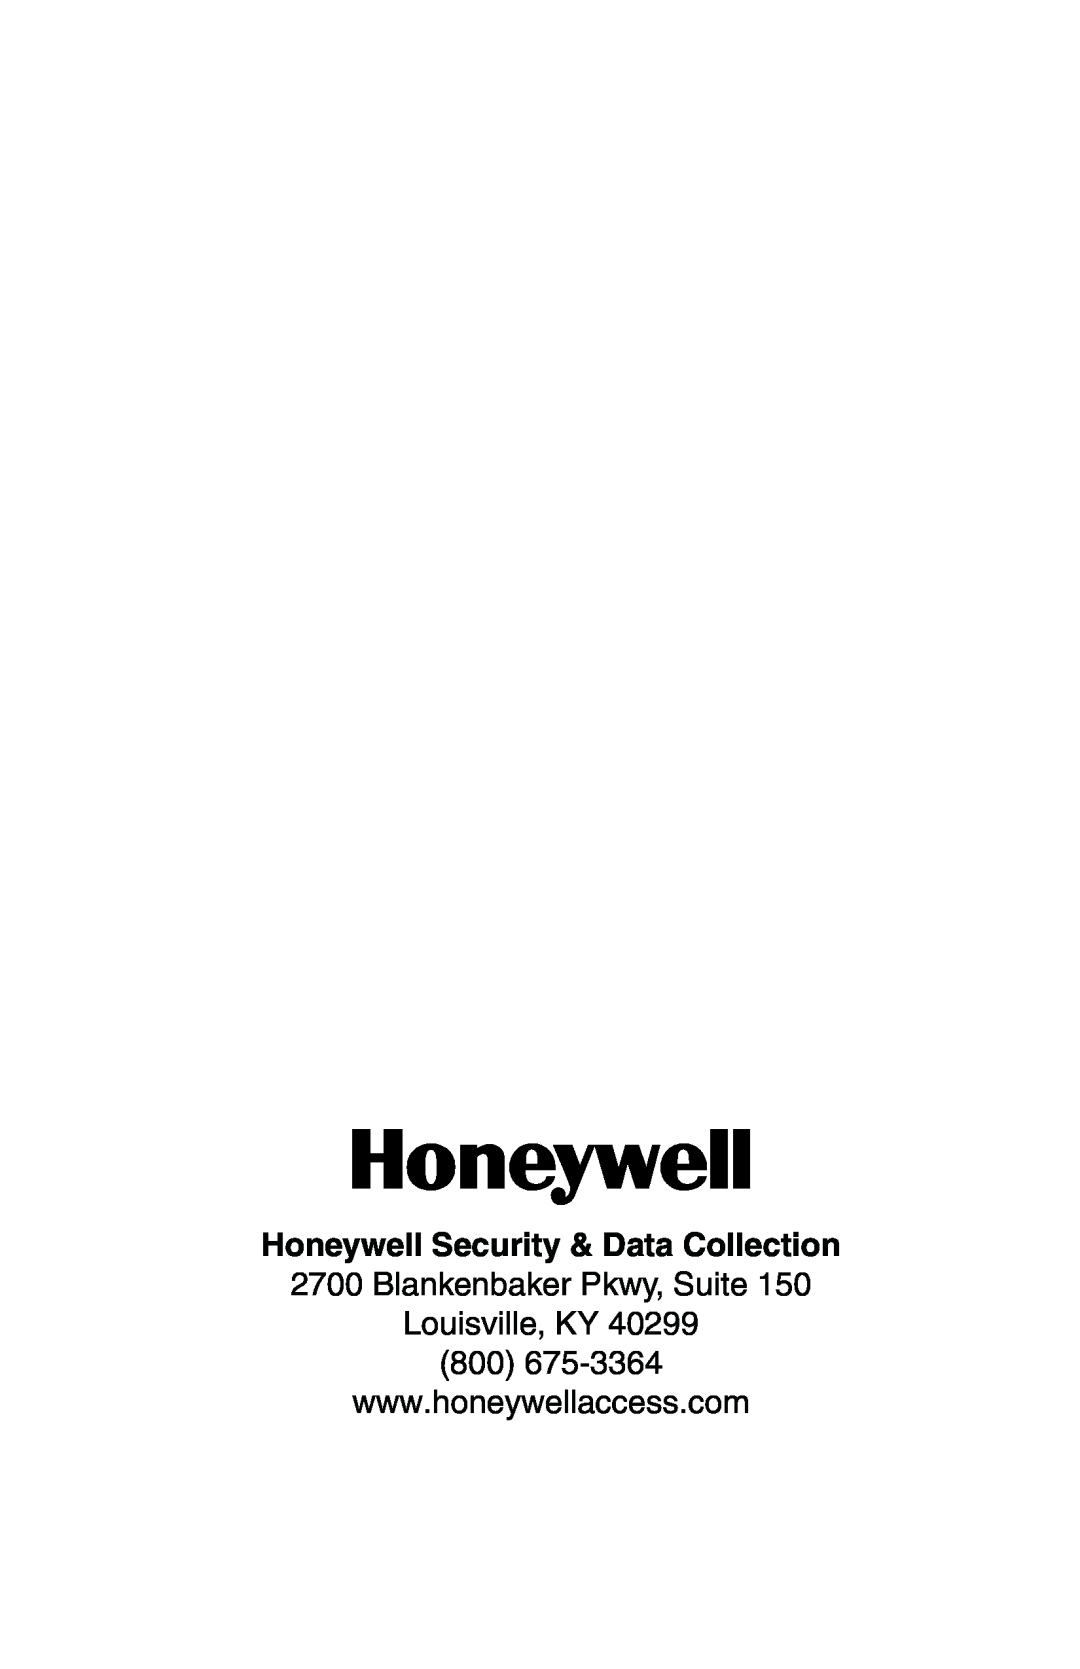 Honeywell PRO-2200 manual Honeywell Security & Data Collection, Blankenbaker Pkwy, Suite Louisville, KY 